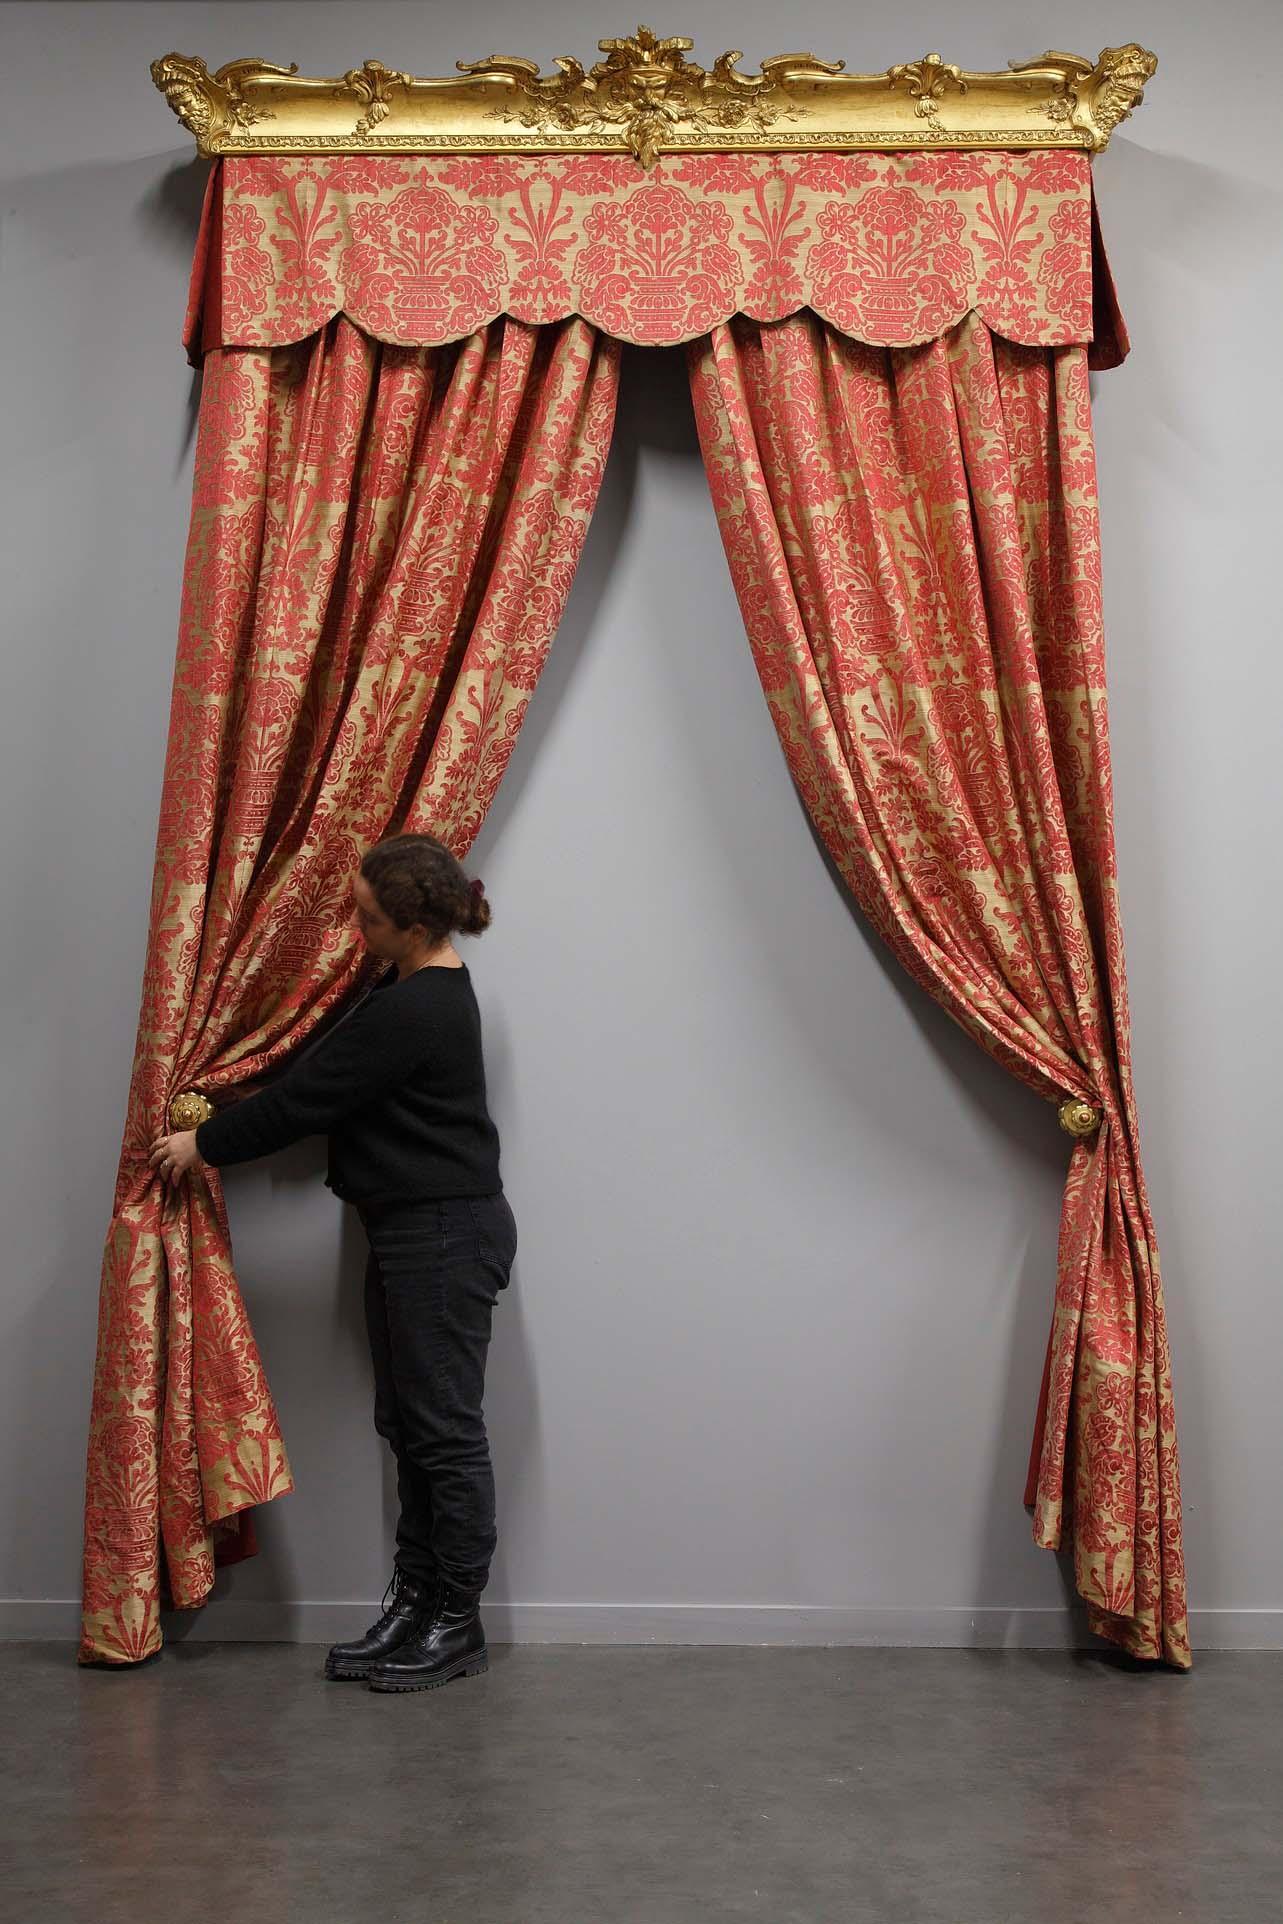 Two Pairs of Fadini-Borghi Curtains and Their Valances Topped by a Gilded Wood 11